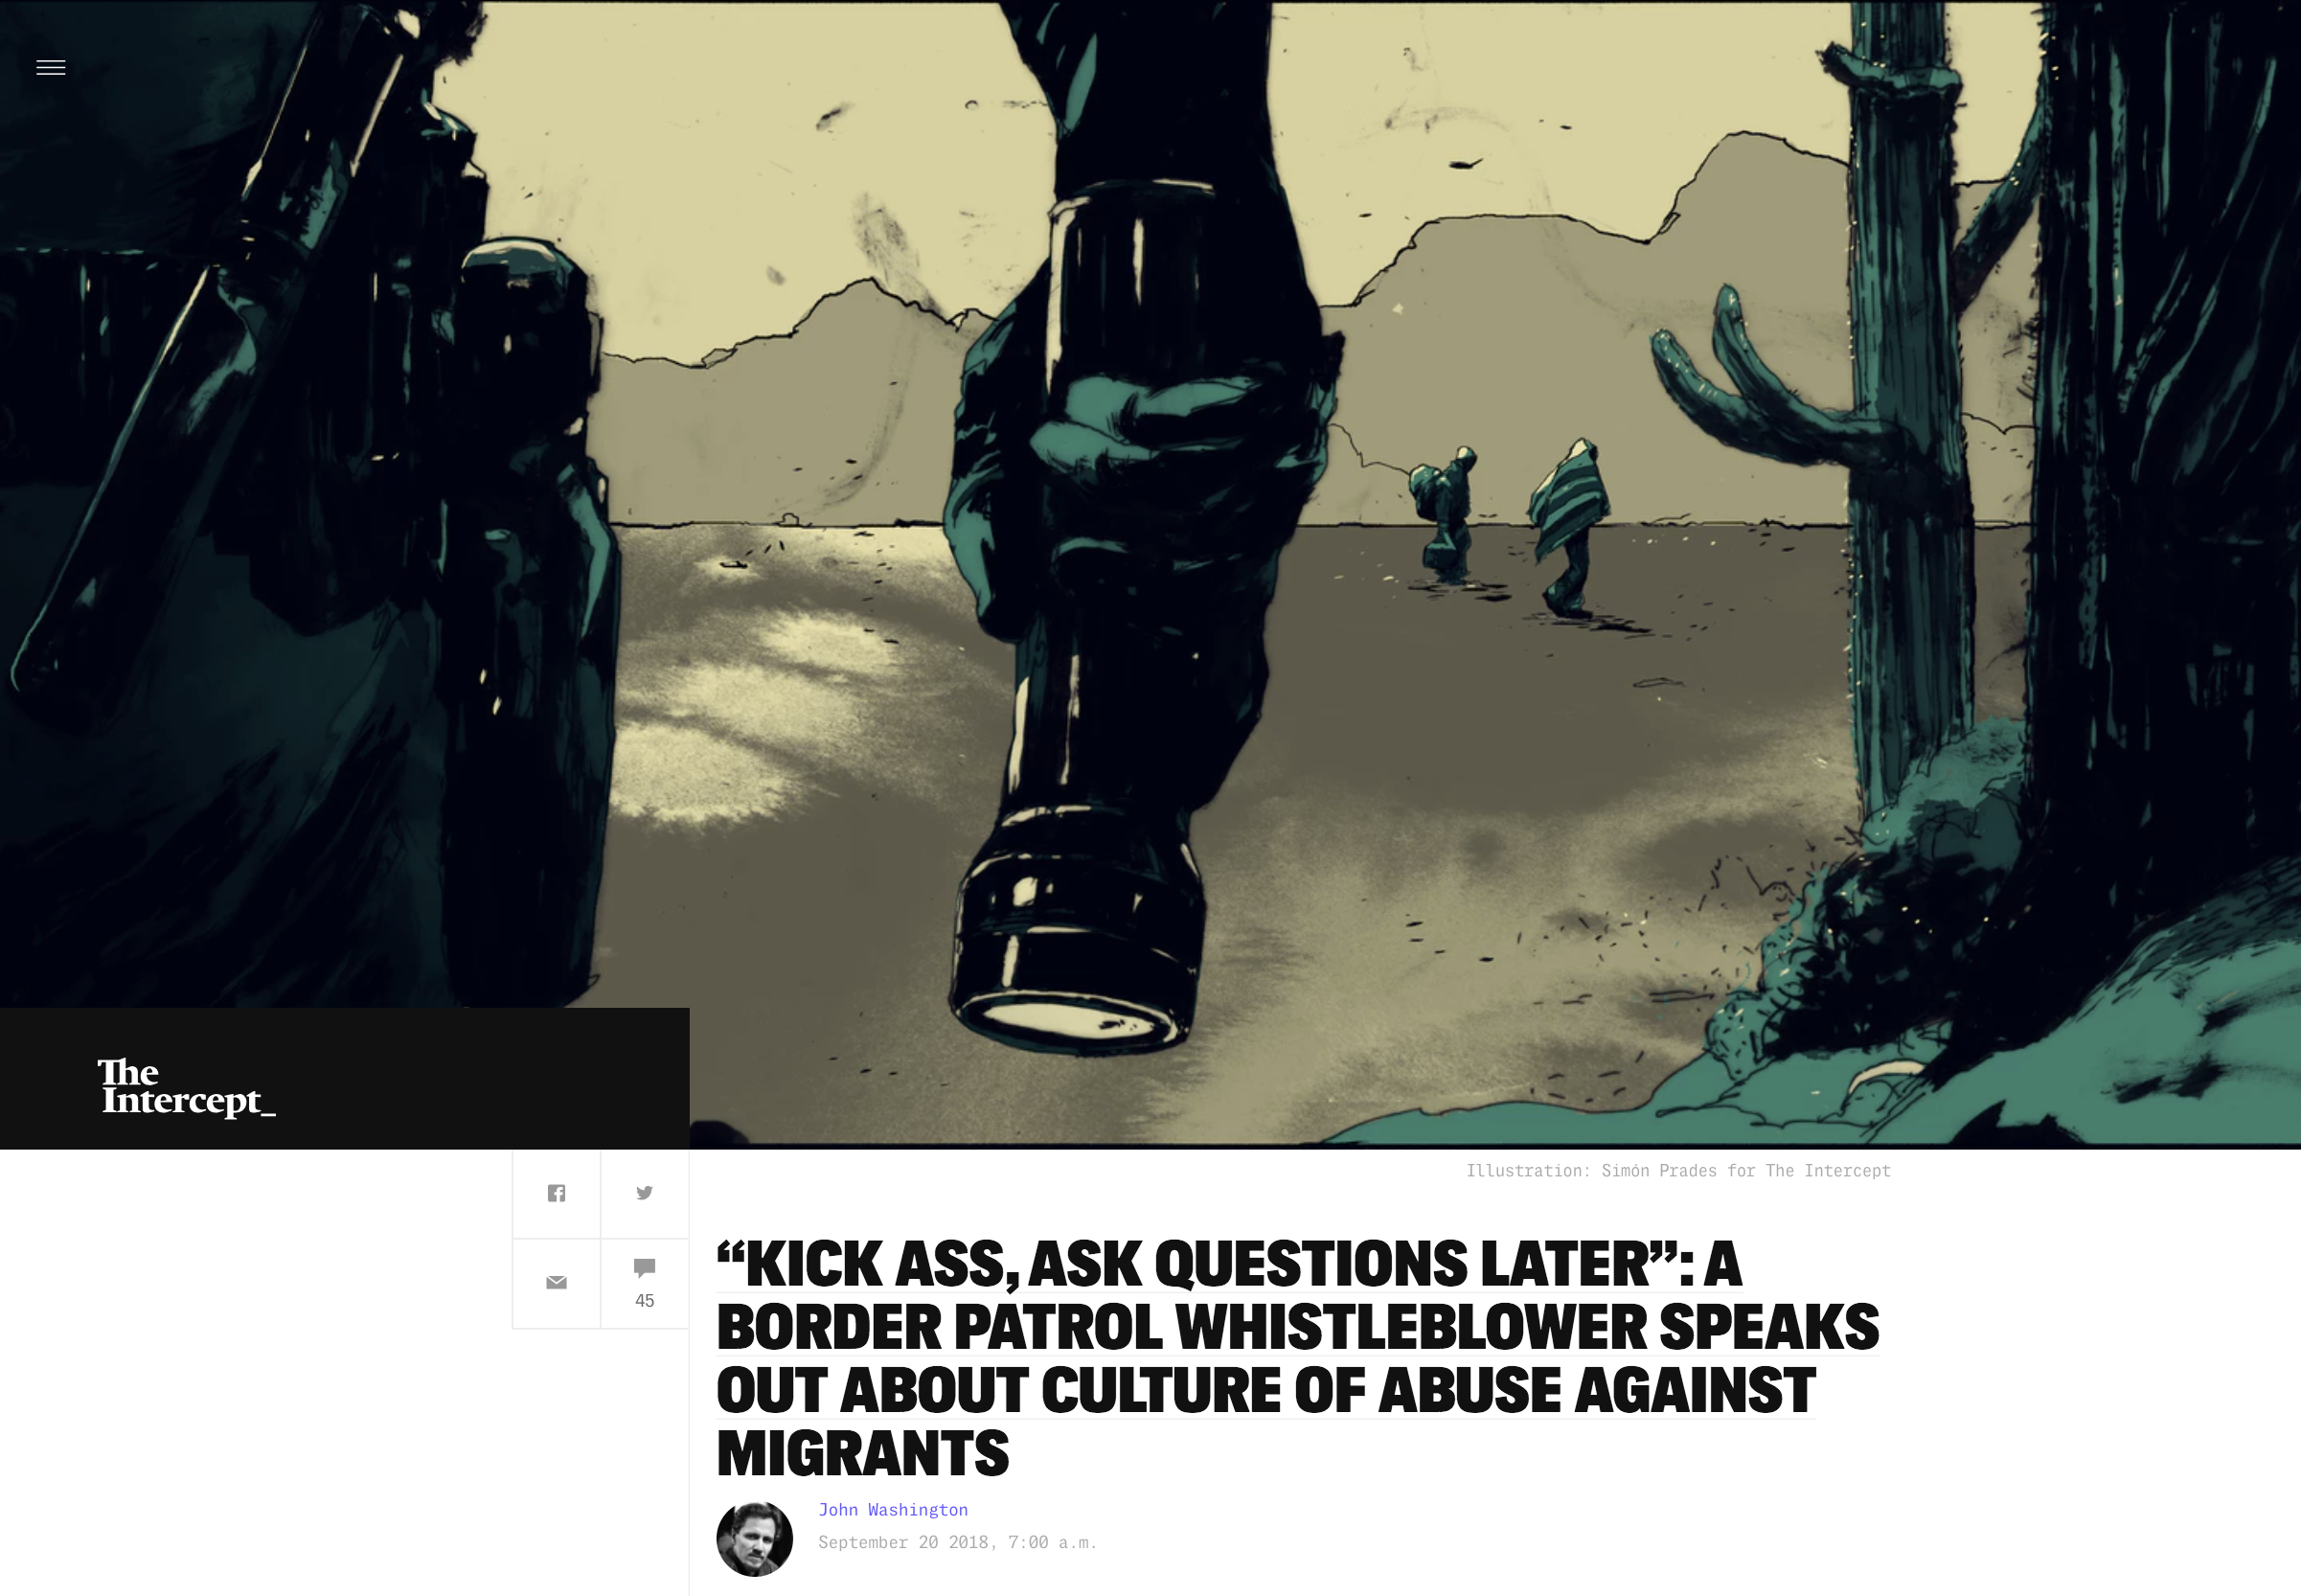  Illustration:  Simón Prades   Art Direction: Ariel Zambelich  Story:  “Kick Ass, Ask Questions Later”: A Border Patrol Whistleblower Speaks Out About Culture Of Abuse Against Migrants  